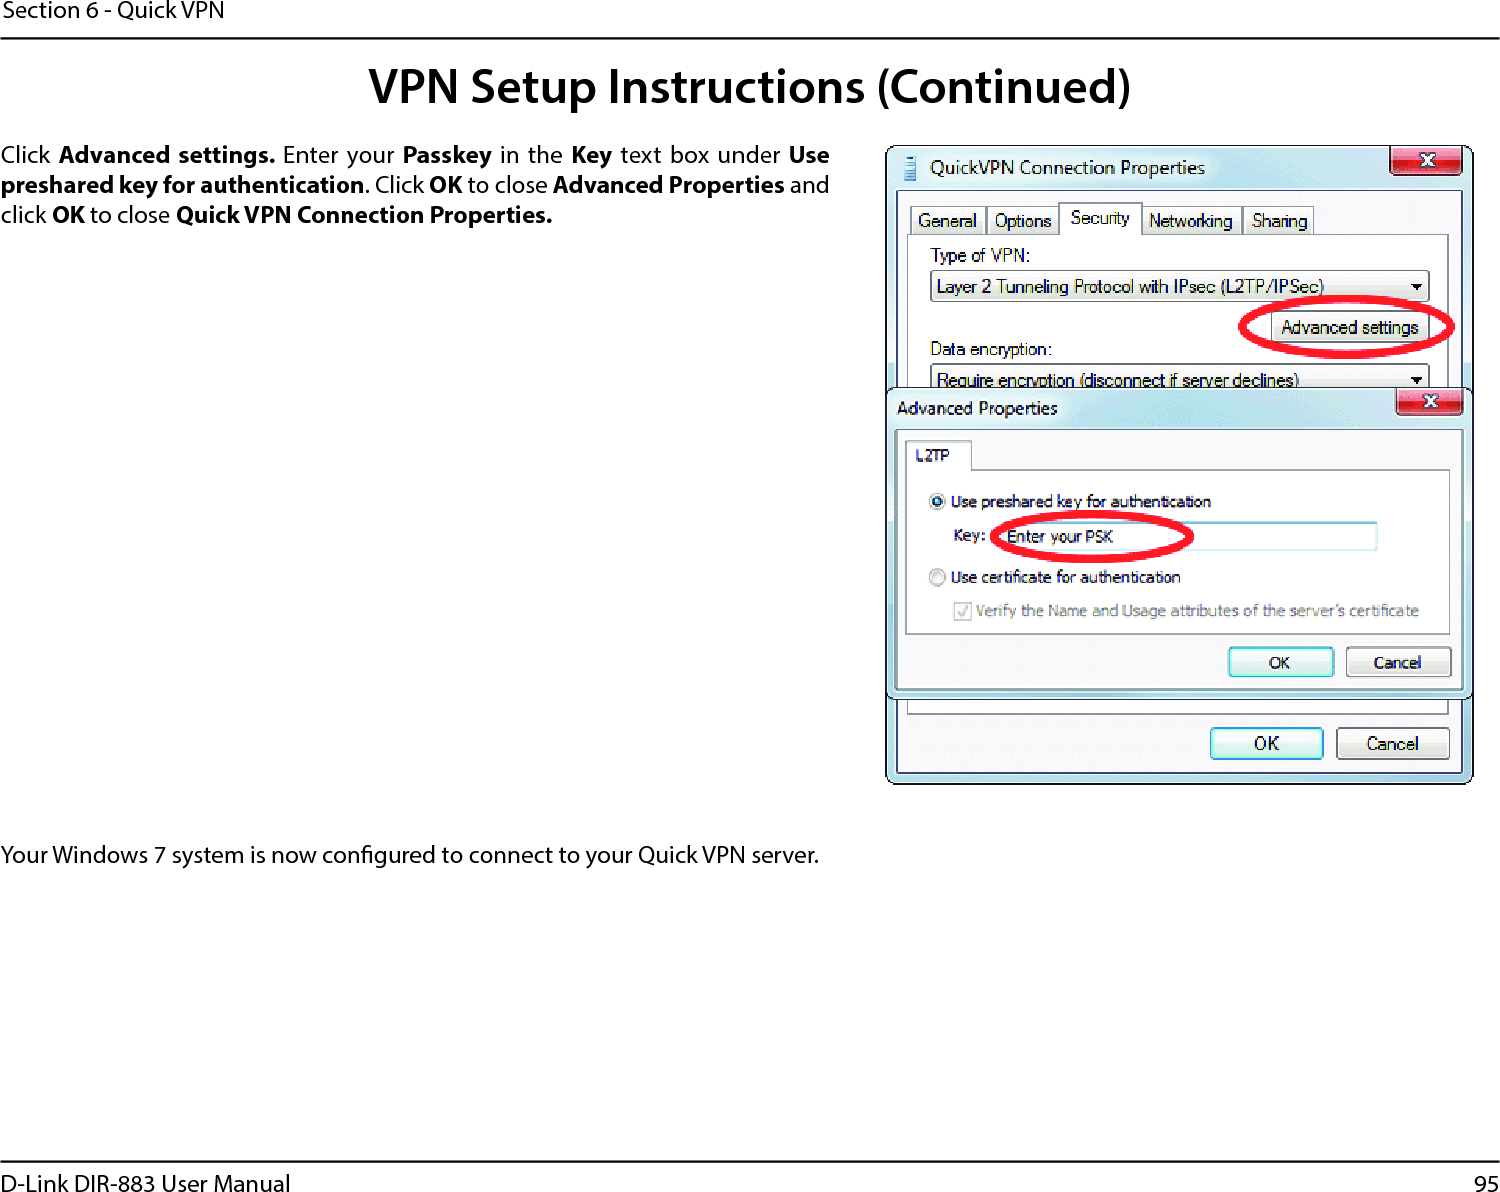 95D-Link DIR-883 User ManualSection 6 - Quick VPNYour Windows 7 system is now congured to connect to your Quick VPN server.Click Advanced settings. Enter your Passkey in the Key text box under Use preshared key for authentication. Click OK to close Advanced Properties and click OK to close Quick VPN Connection Properties.VPN Setup Instructions (Continued)